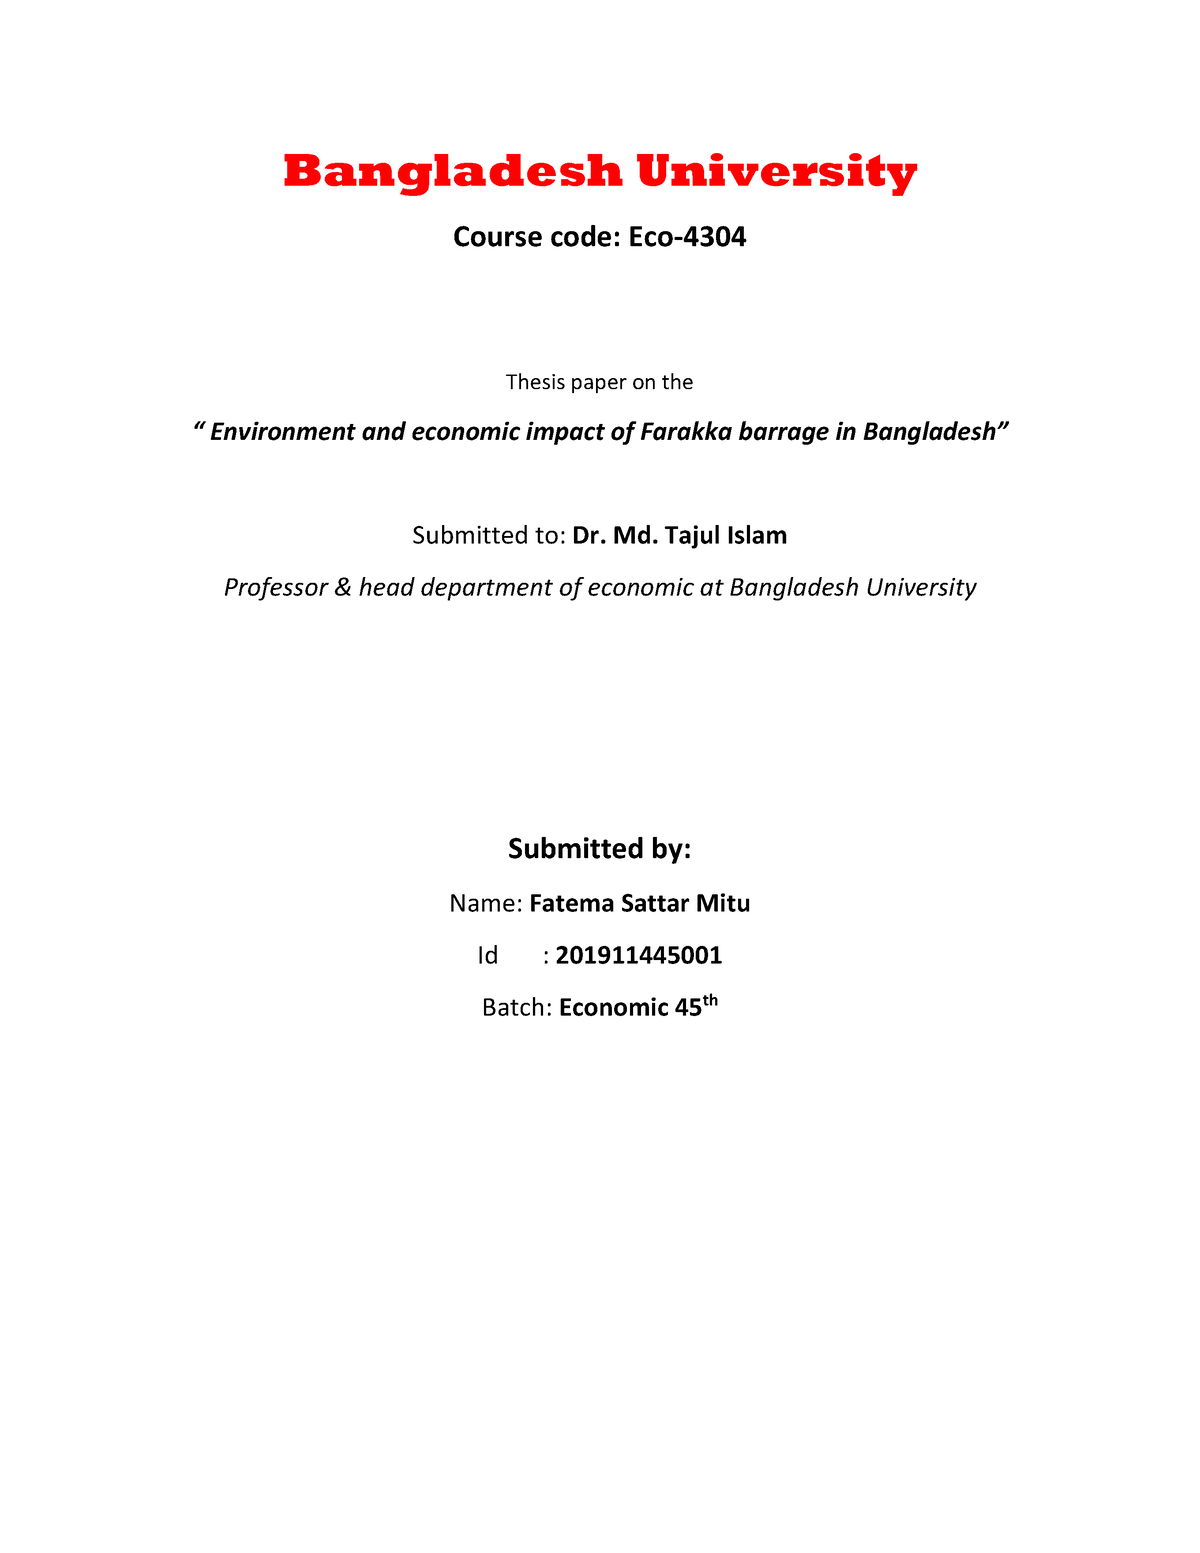 thesis paper in bangladesh